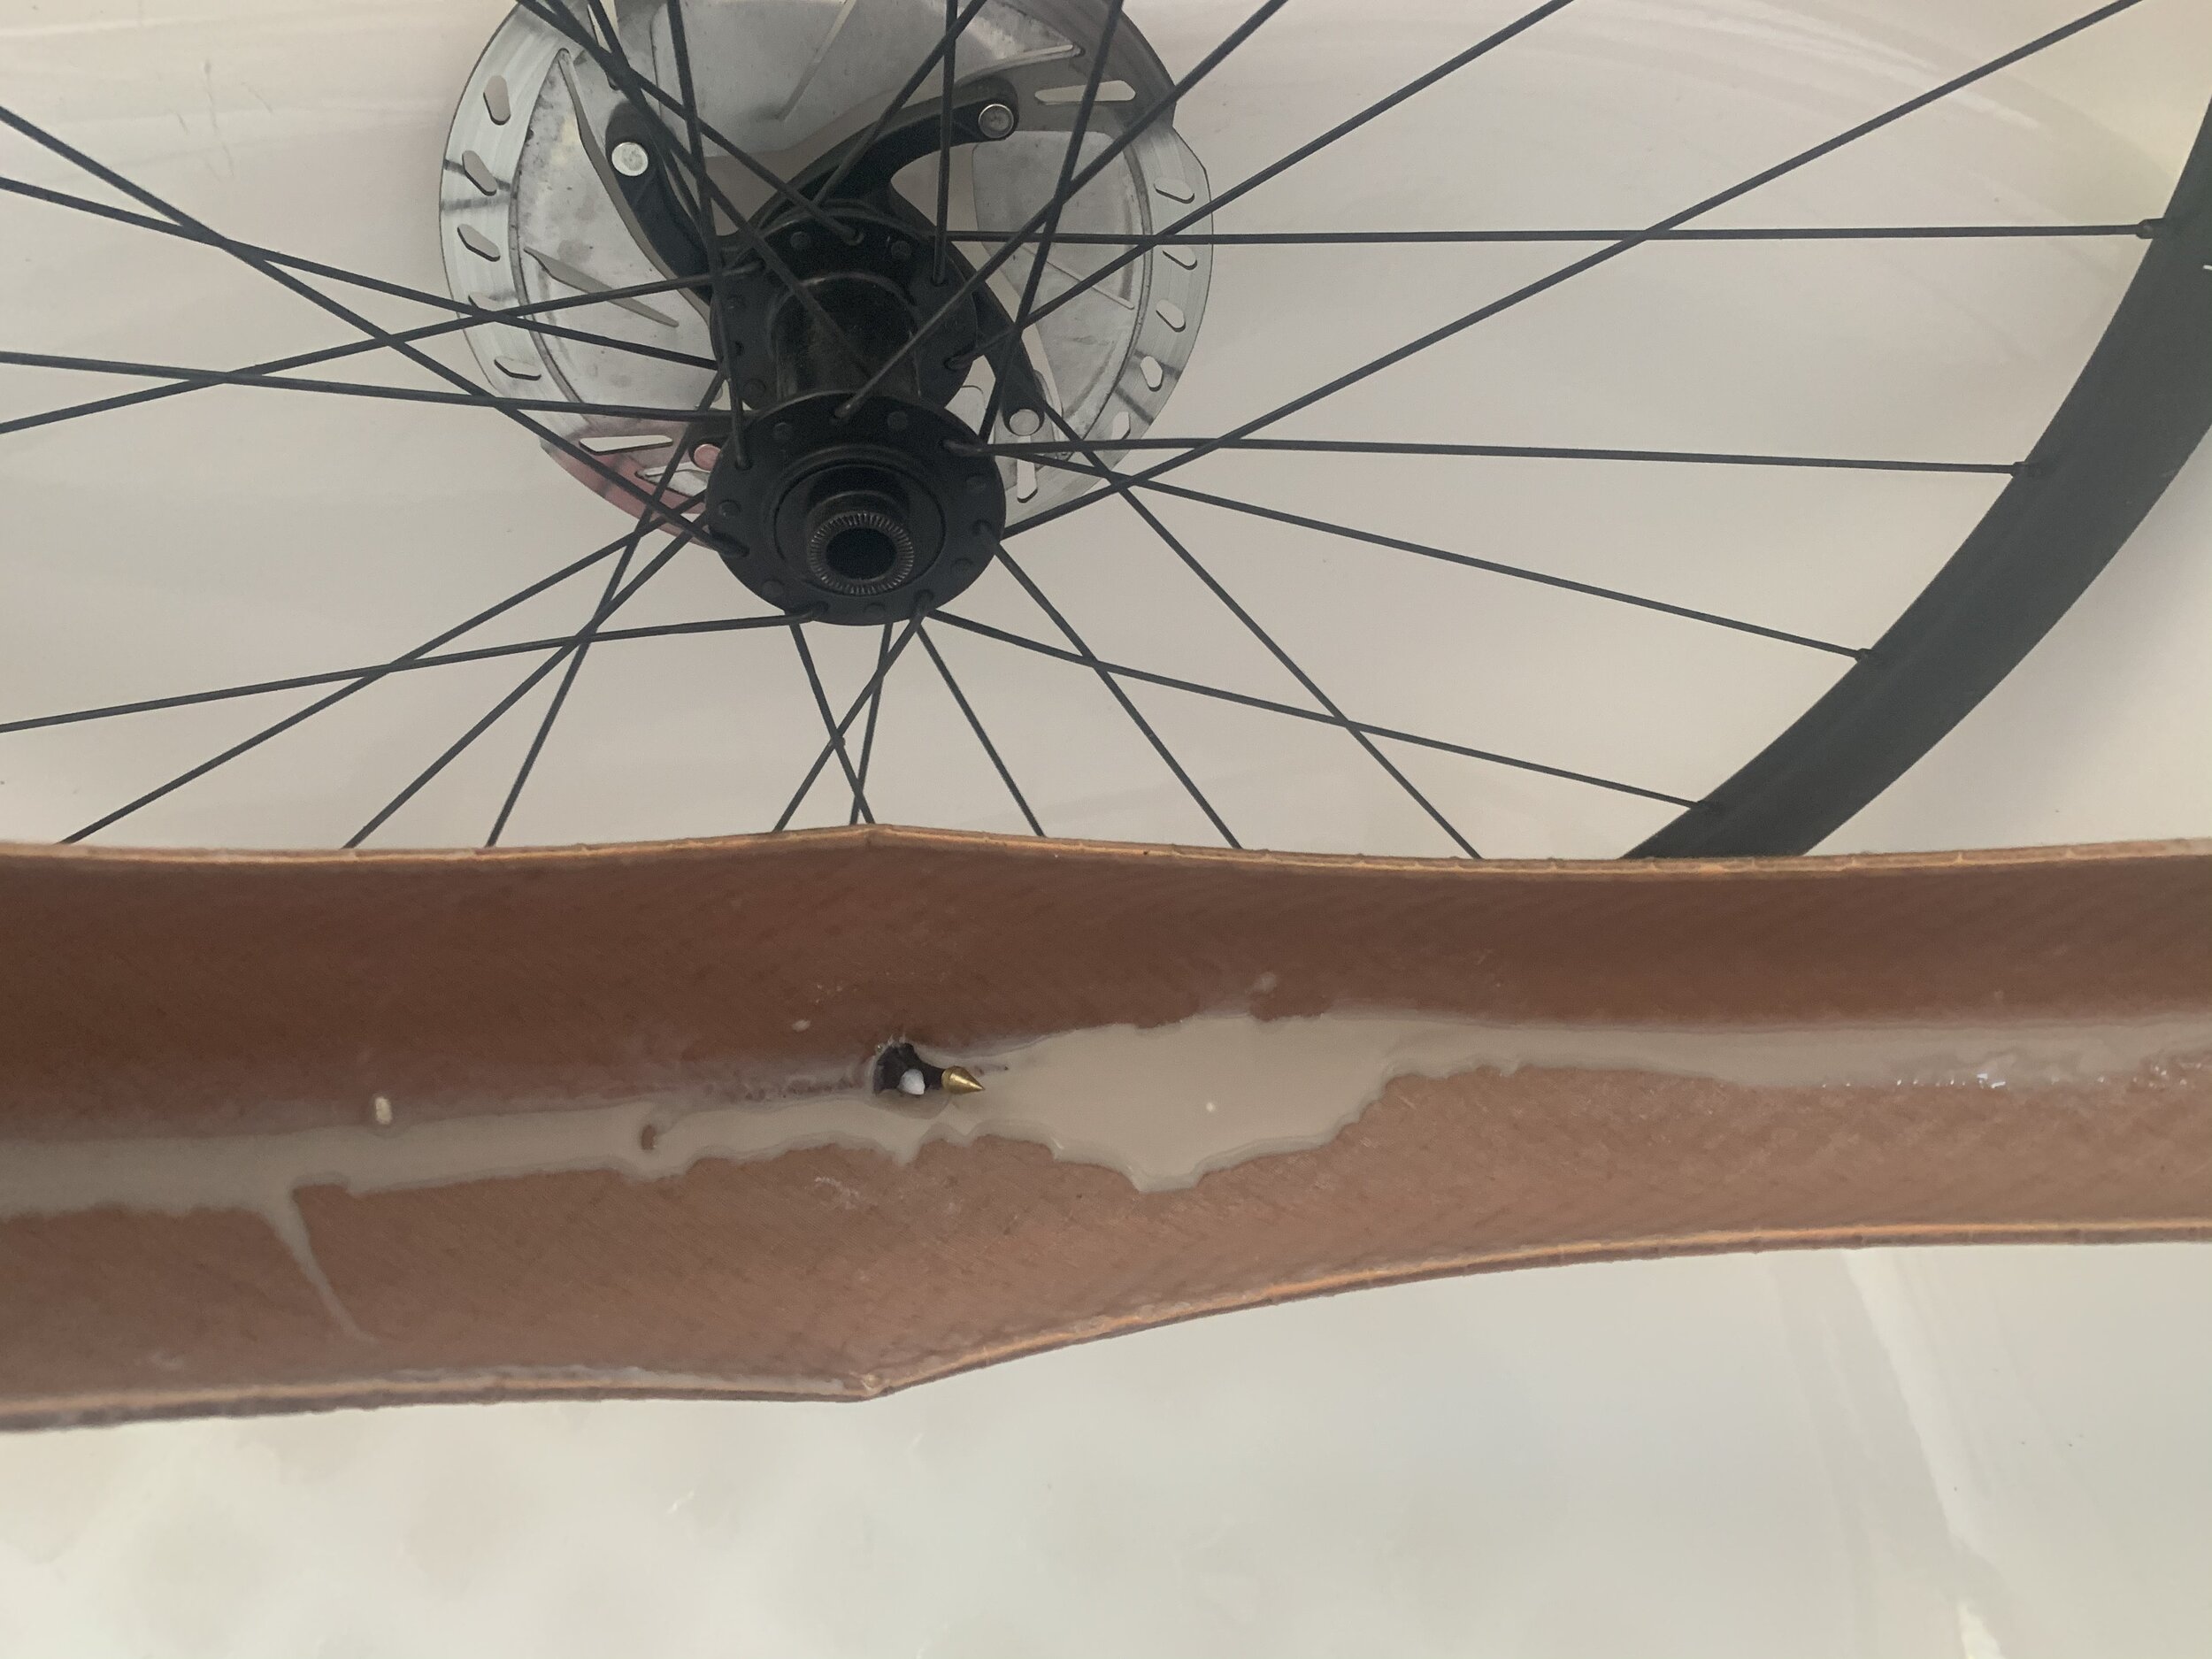 Removing the riddled-with-punctures GravelKings